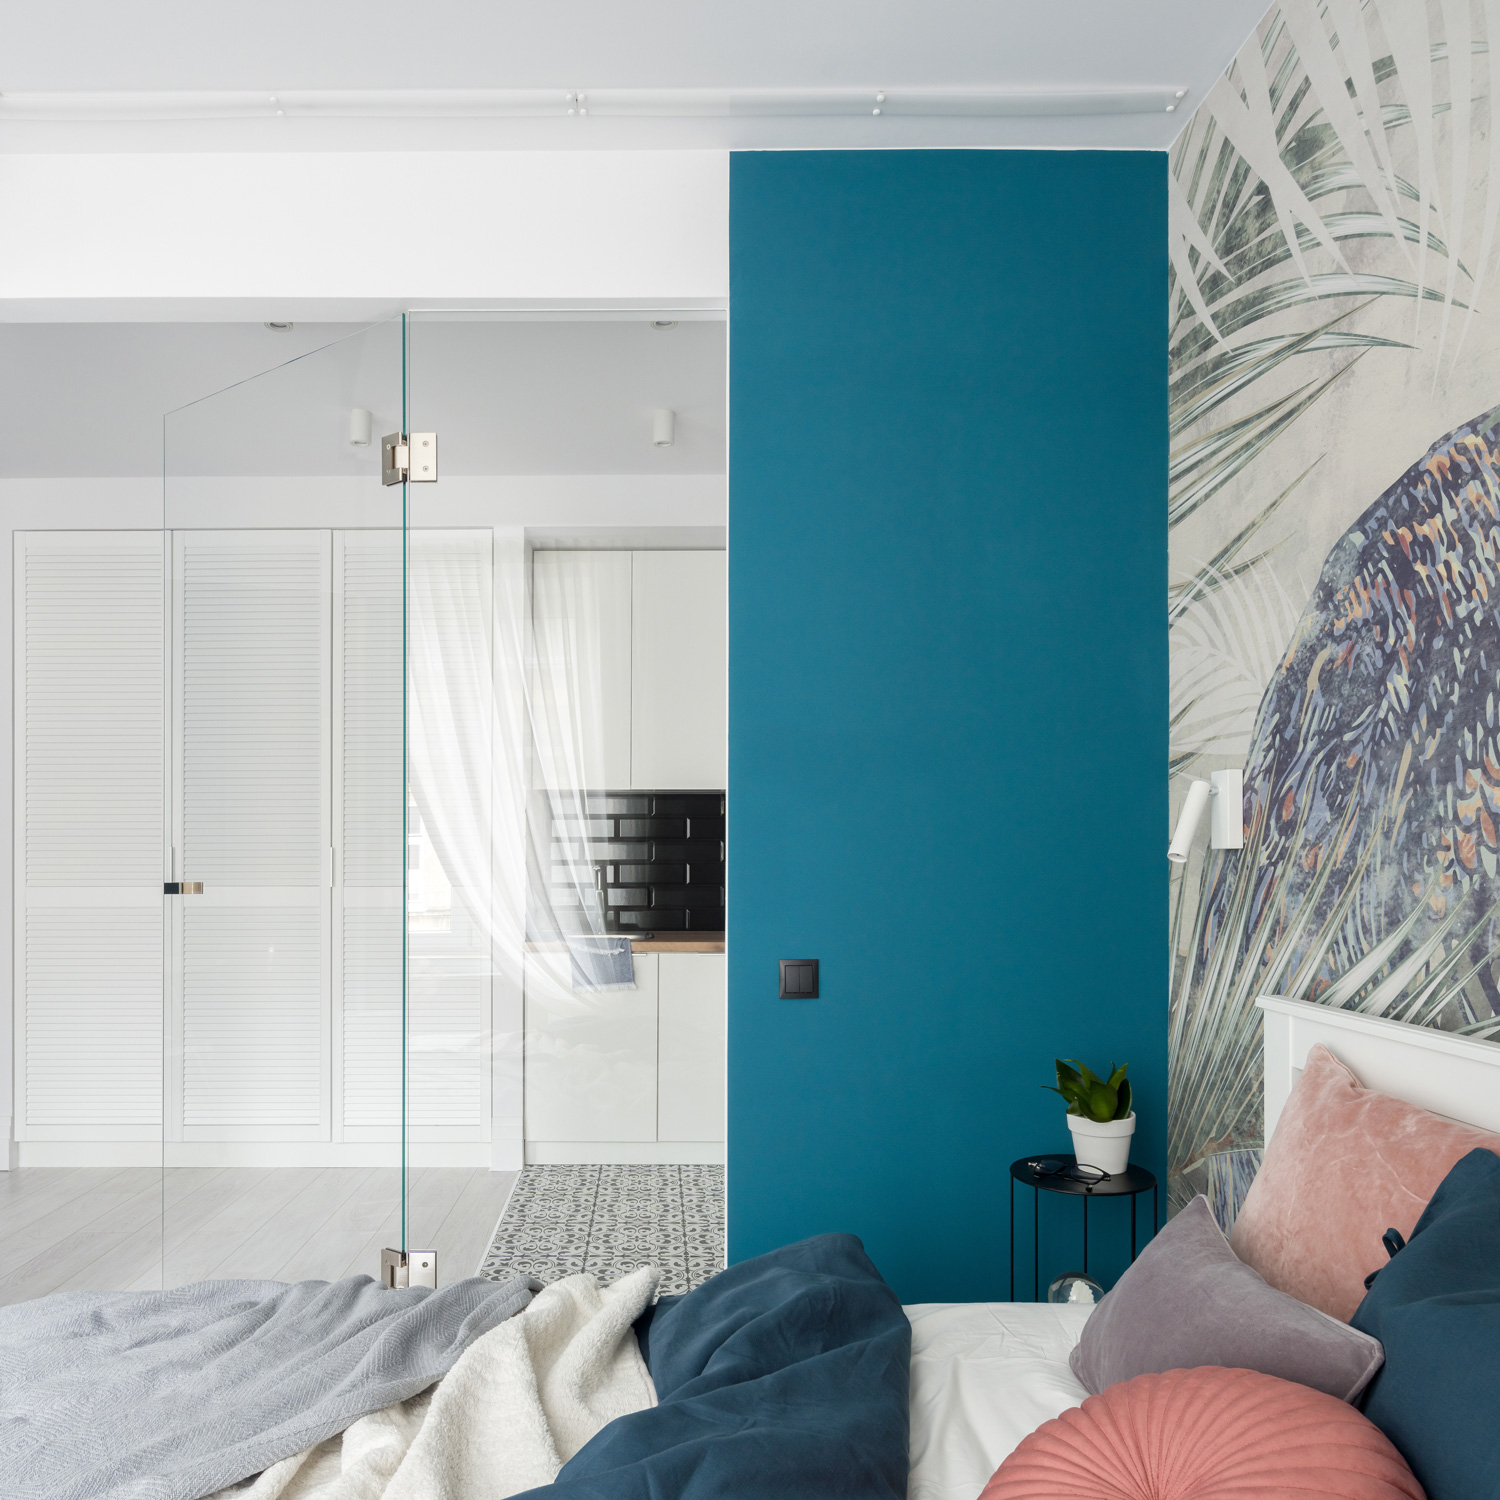 Stylish and chic bedroom with glass doors and decorative blue wall and nice wallpaper behind bed